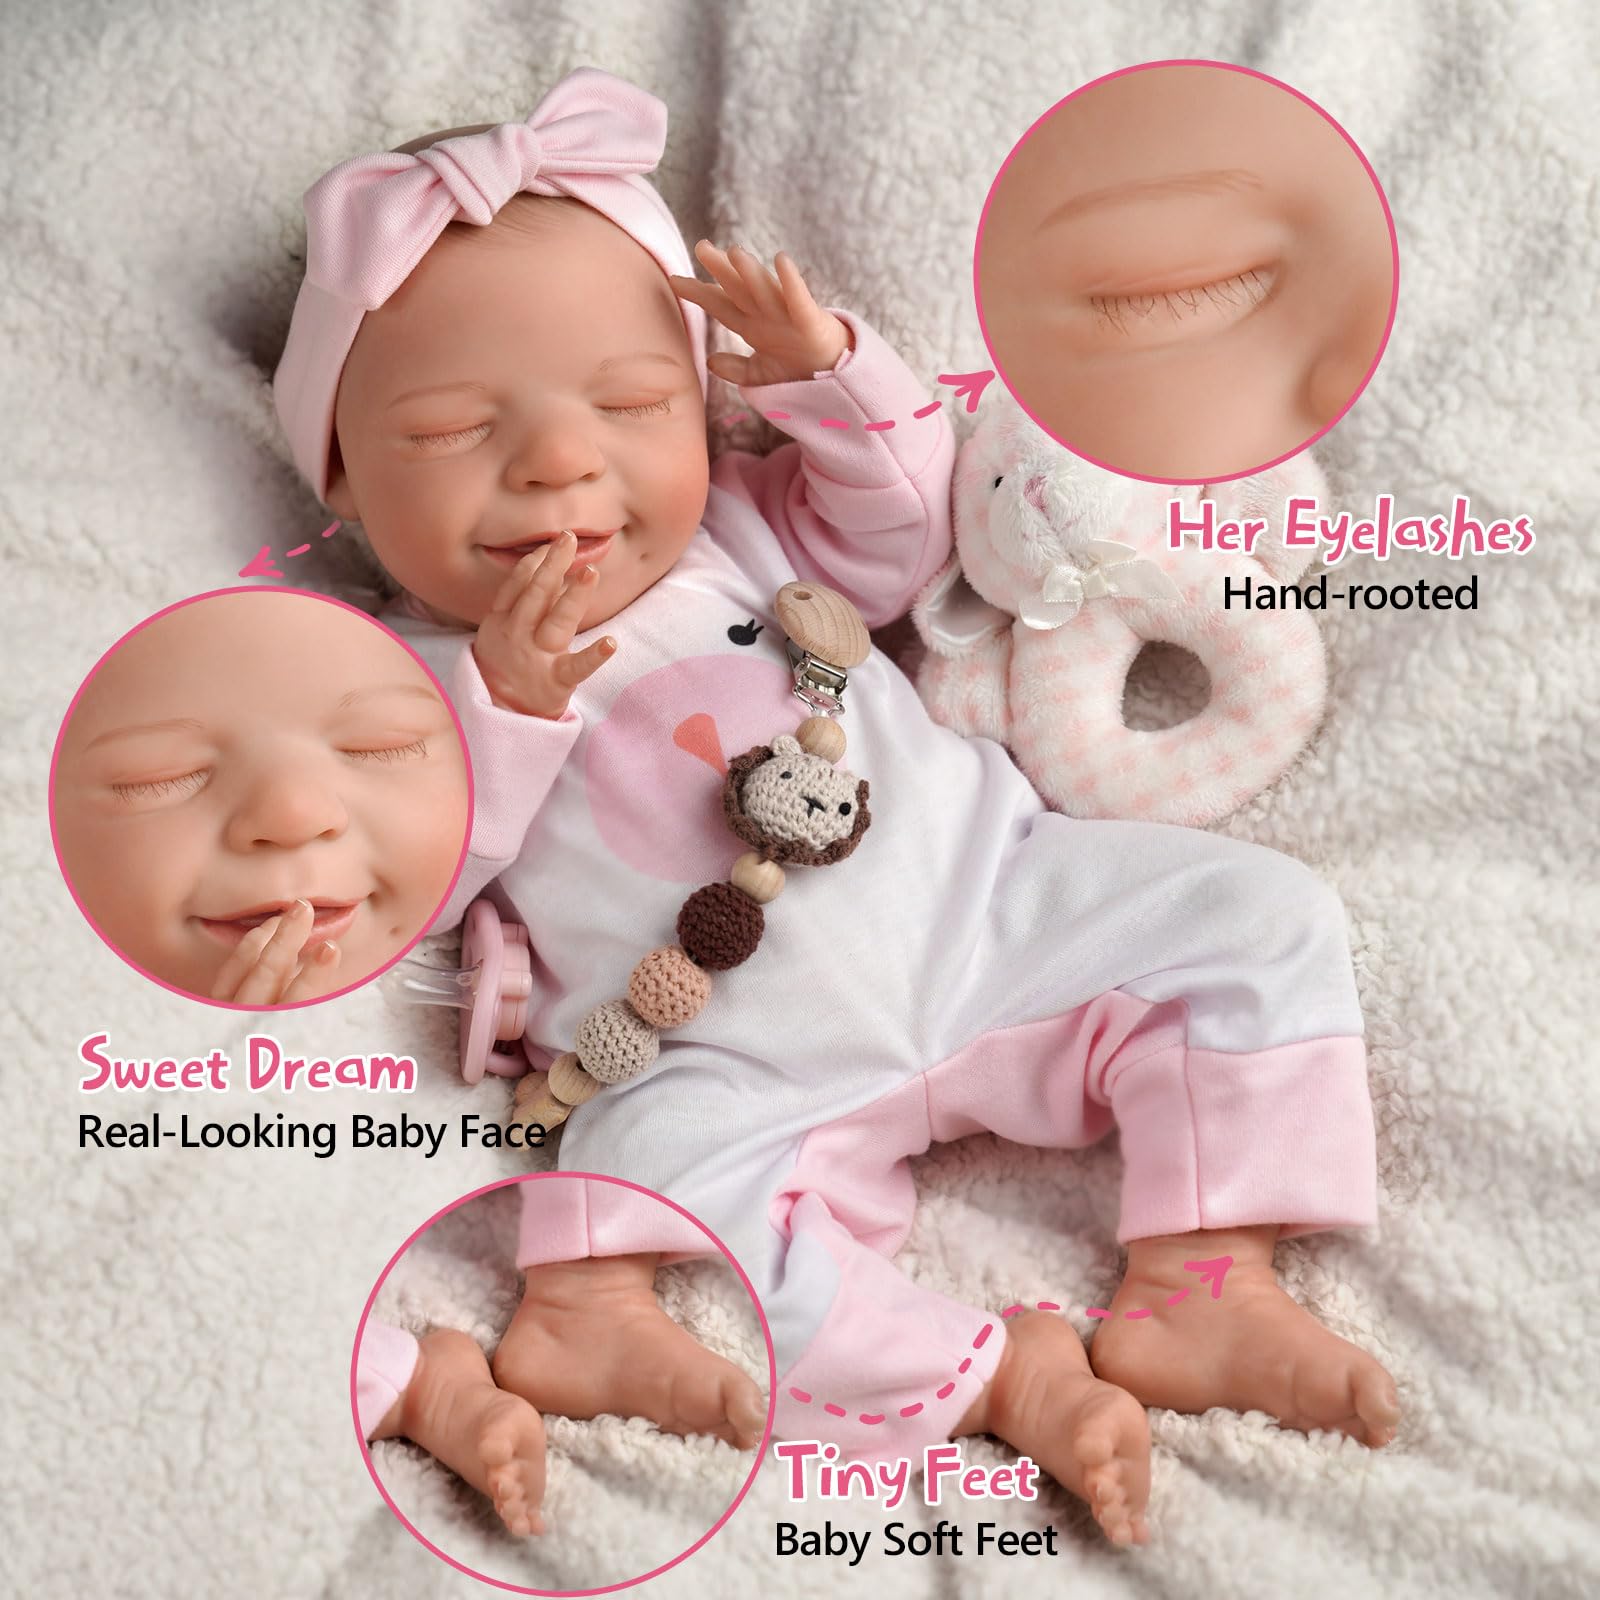 BABESIDE Lifelike Reborn Baby Dolls - 20-Inch Sweet Smile Real Life Realistic-Newborn Full Body Vinyl Sleeping Baby Girl with Toy Accessories Gift Set for Kids Age 3+